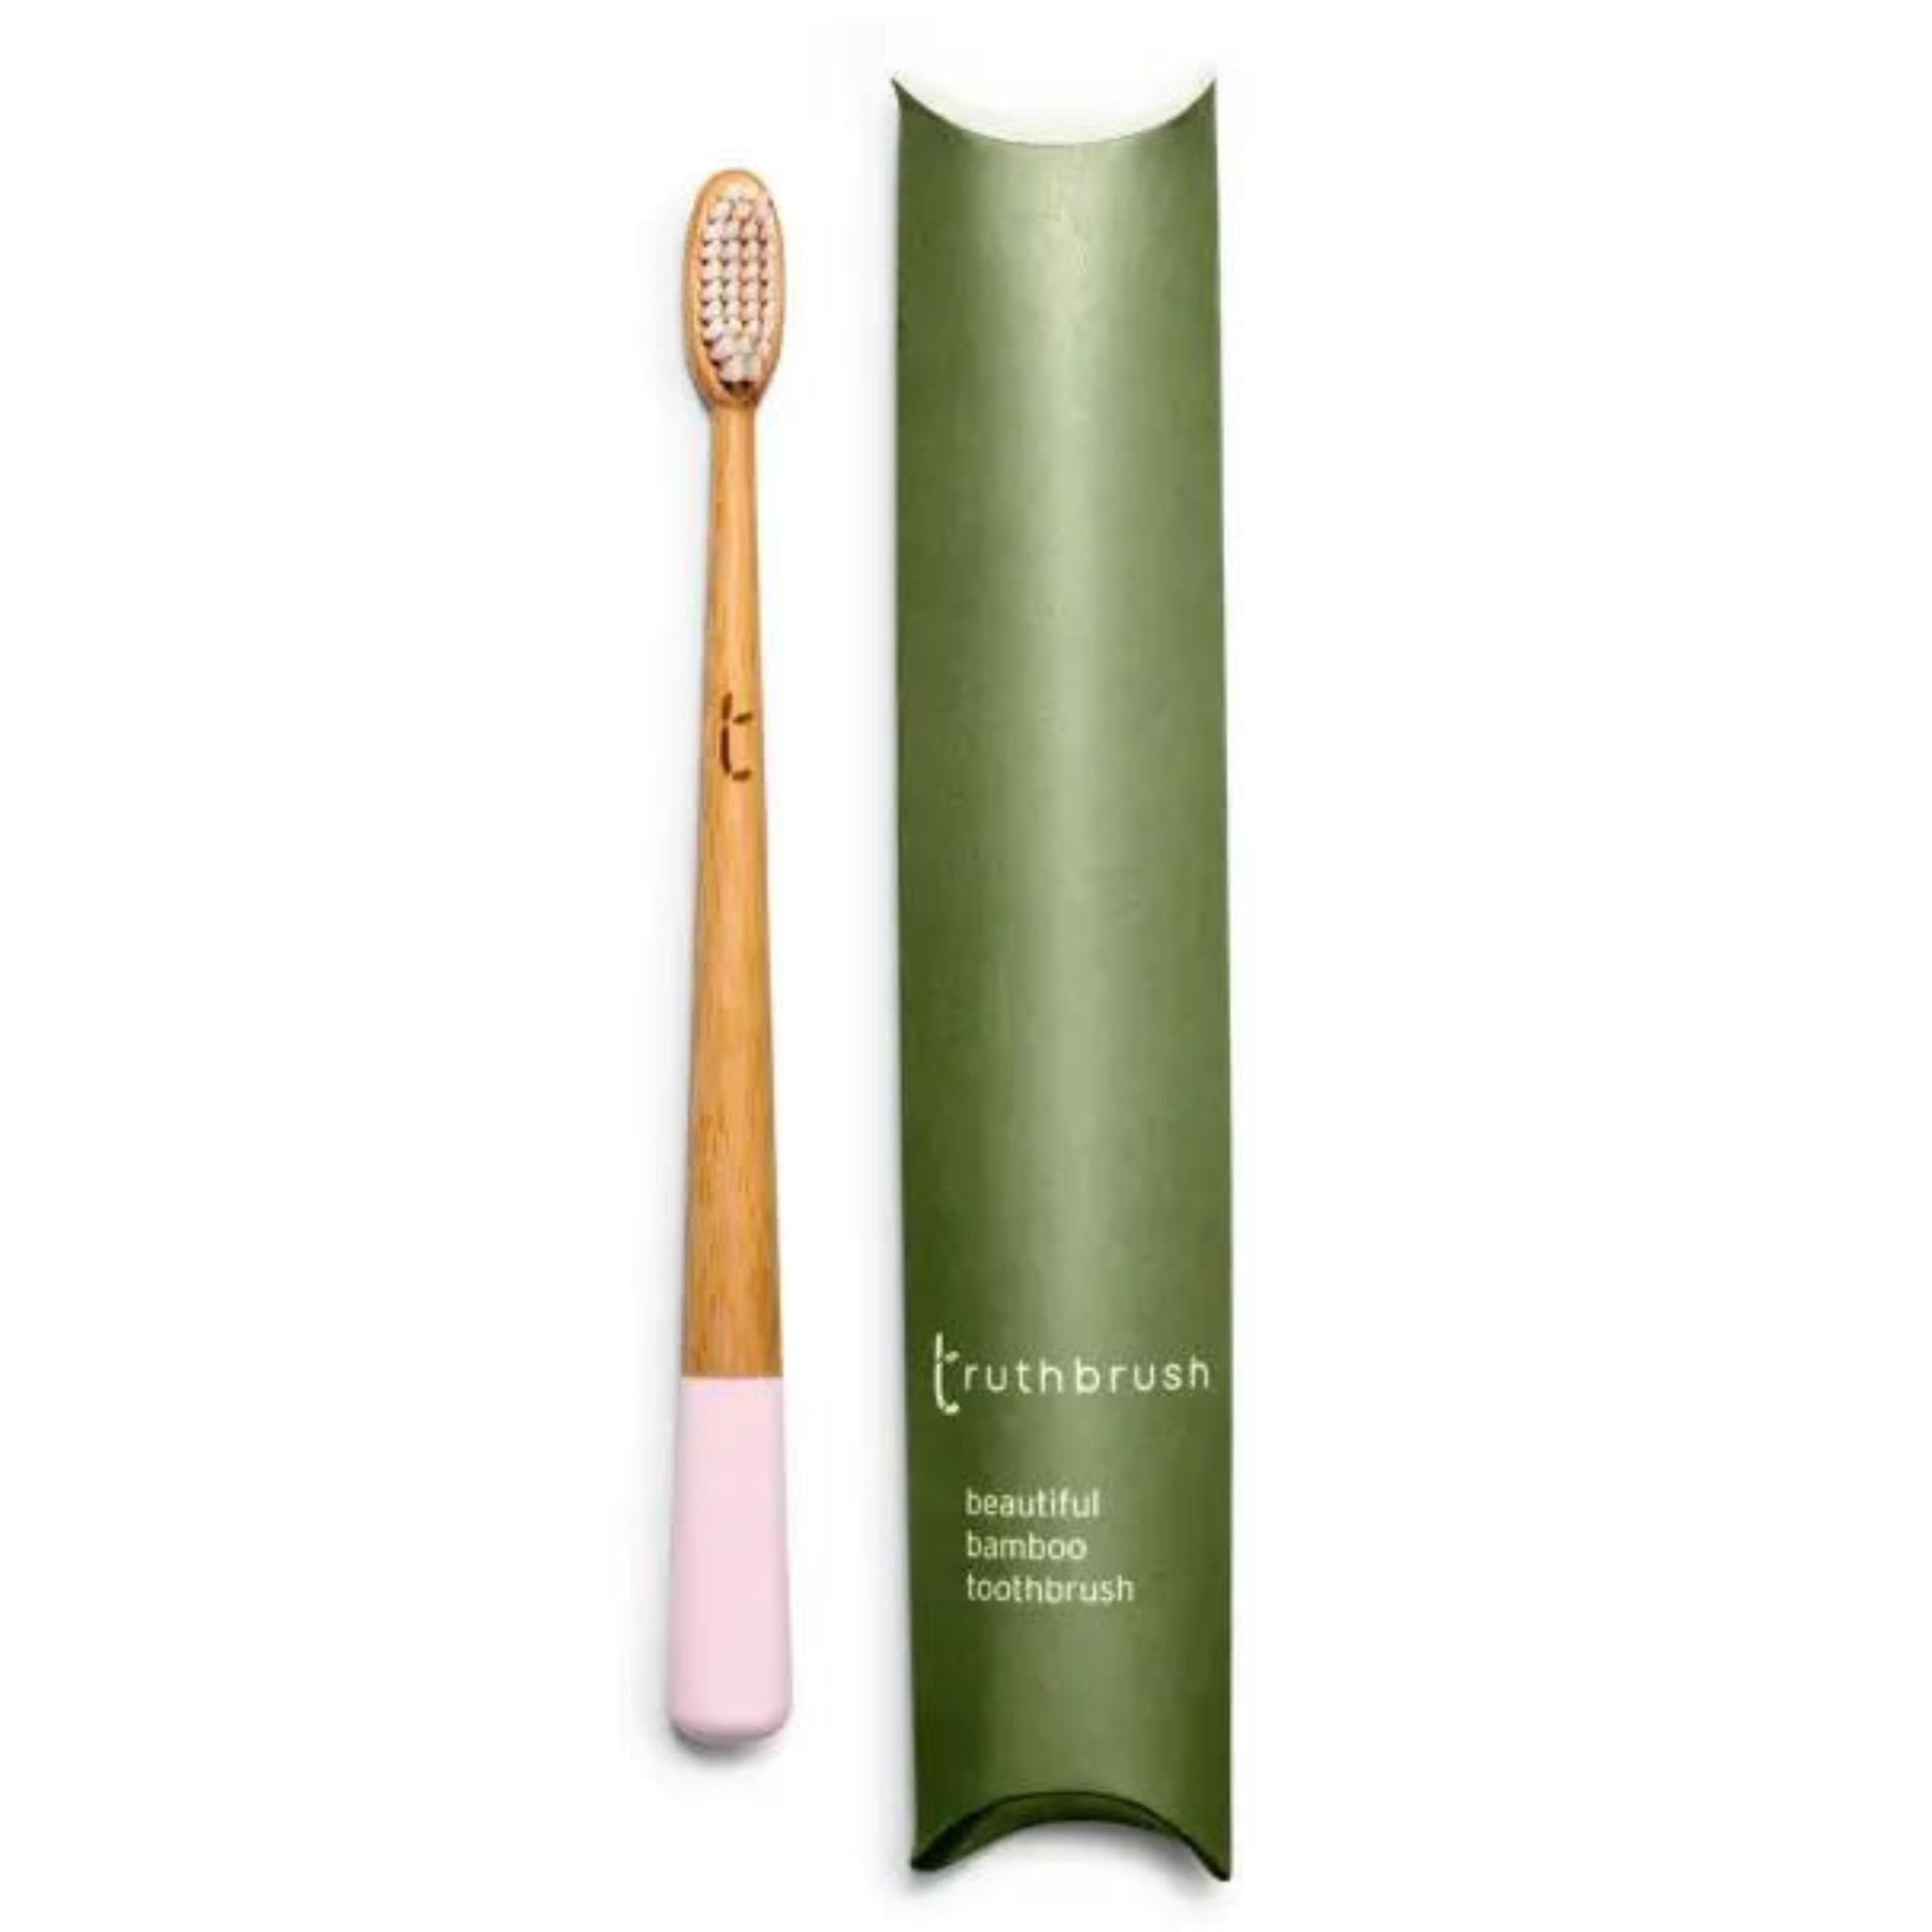 Bamboo toothbrush with Medium plant-based bristles in green